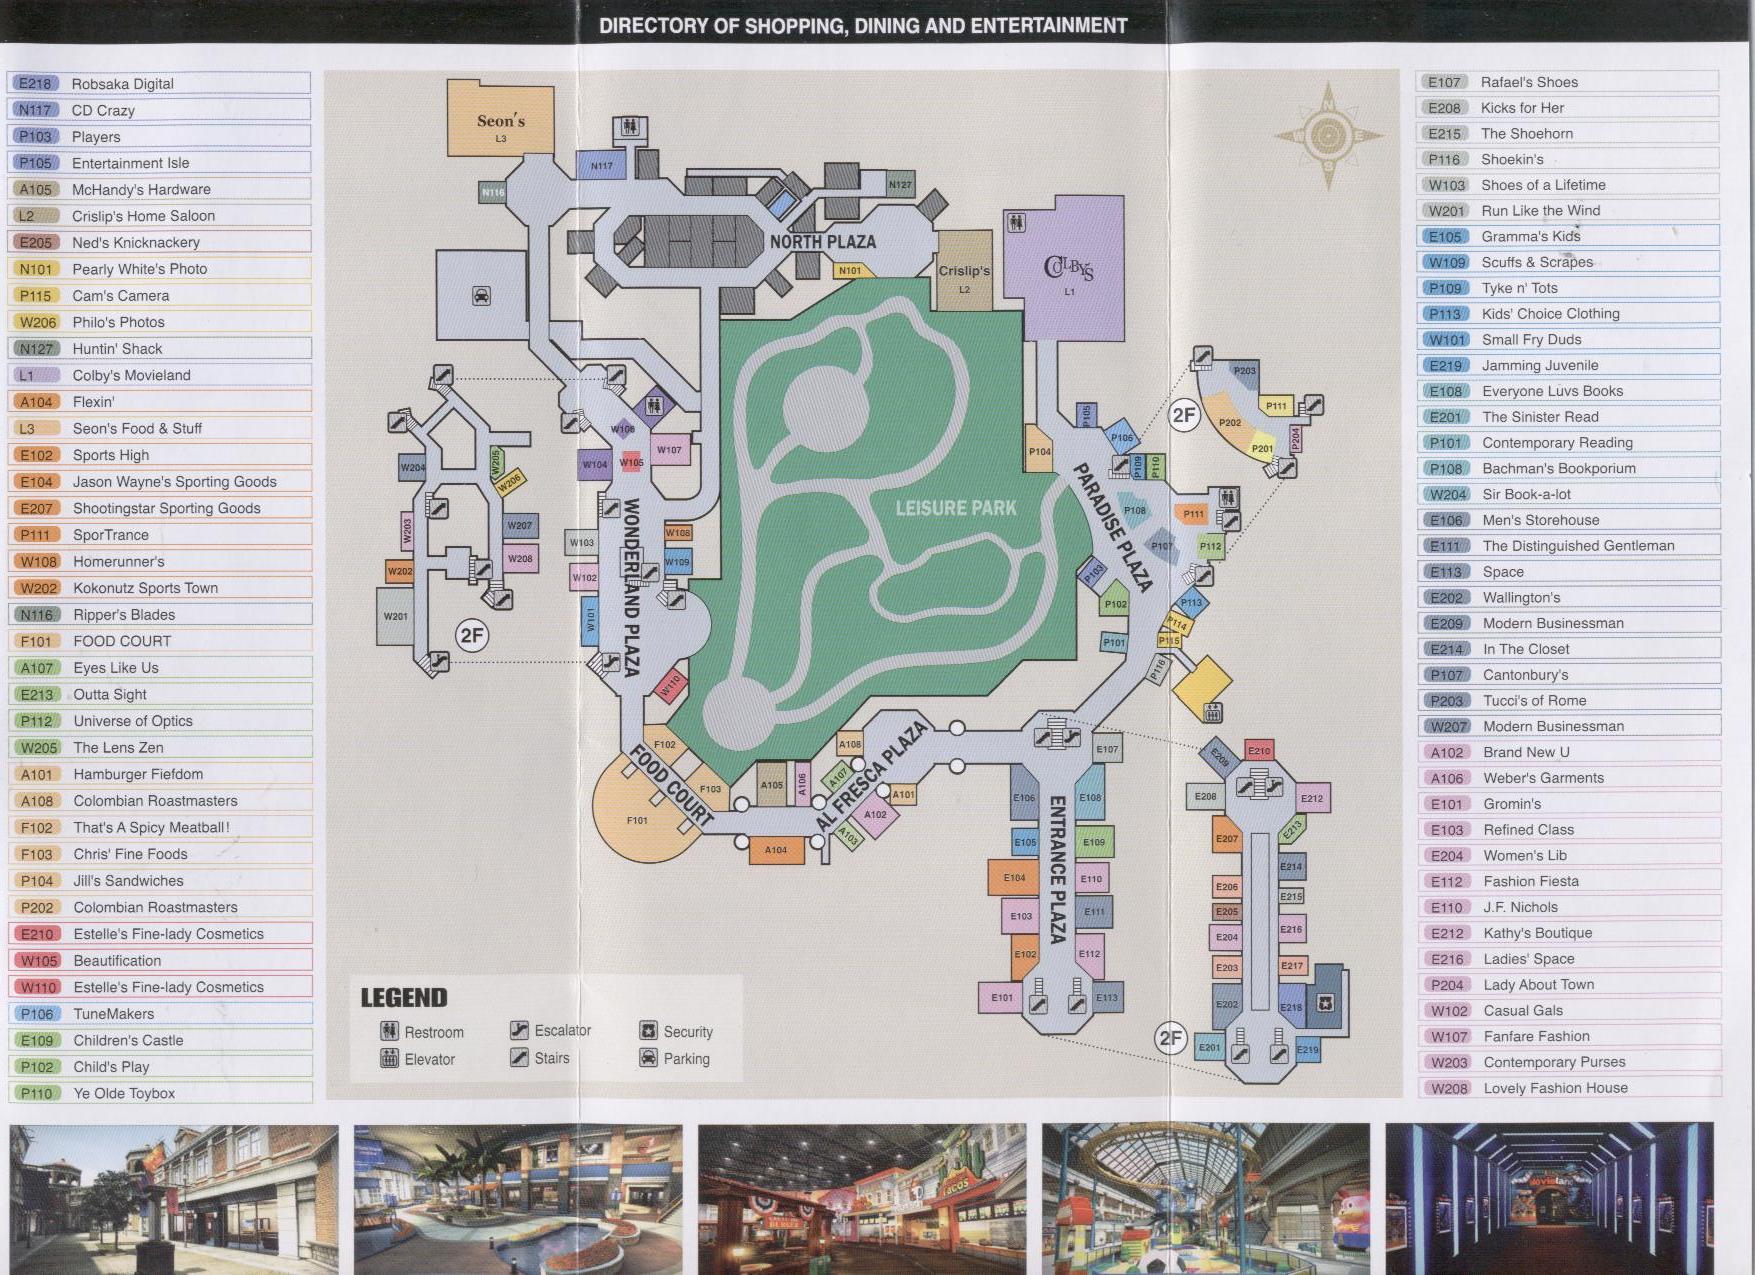 dead rising 3 map size